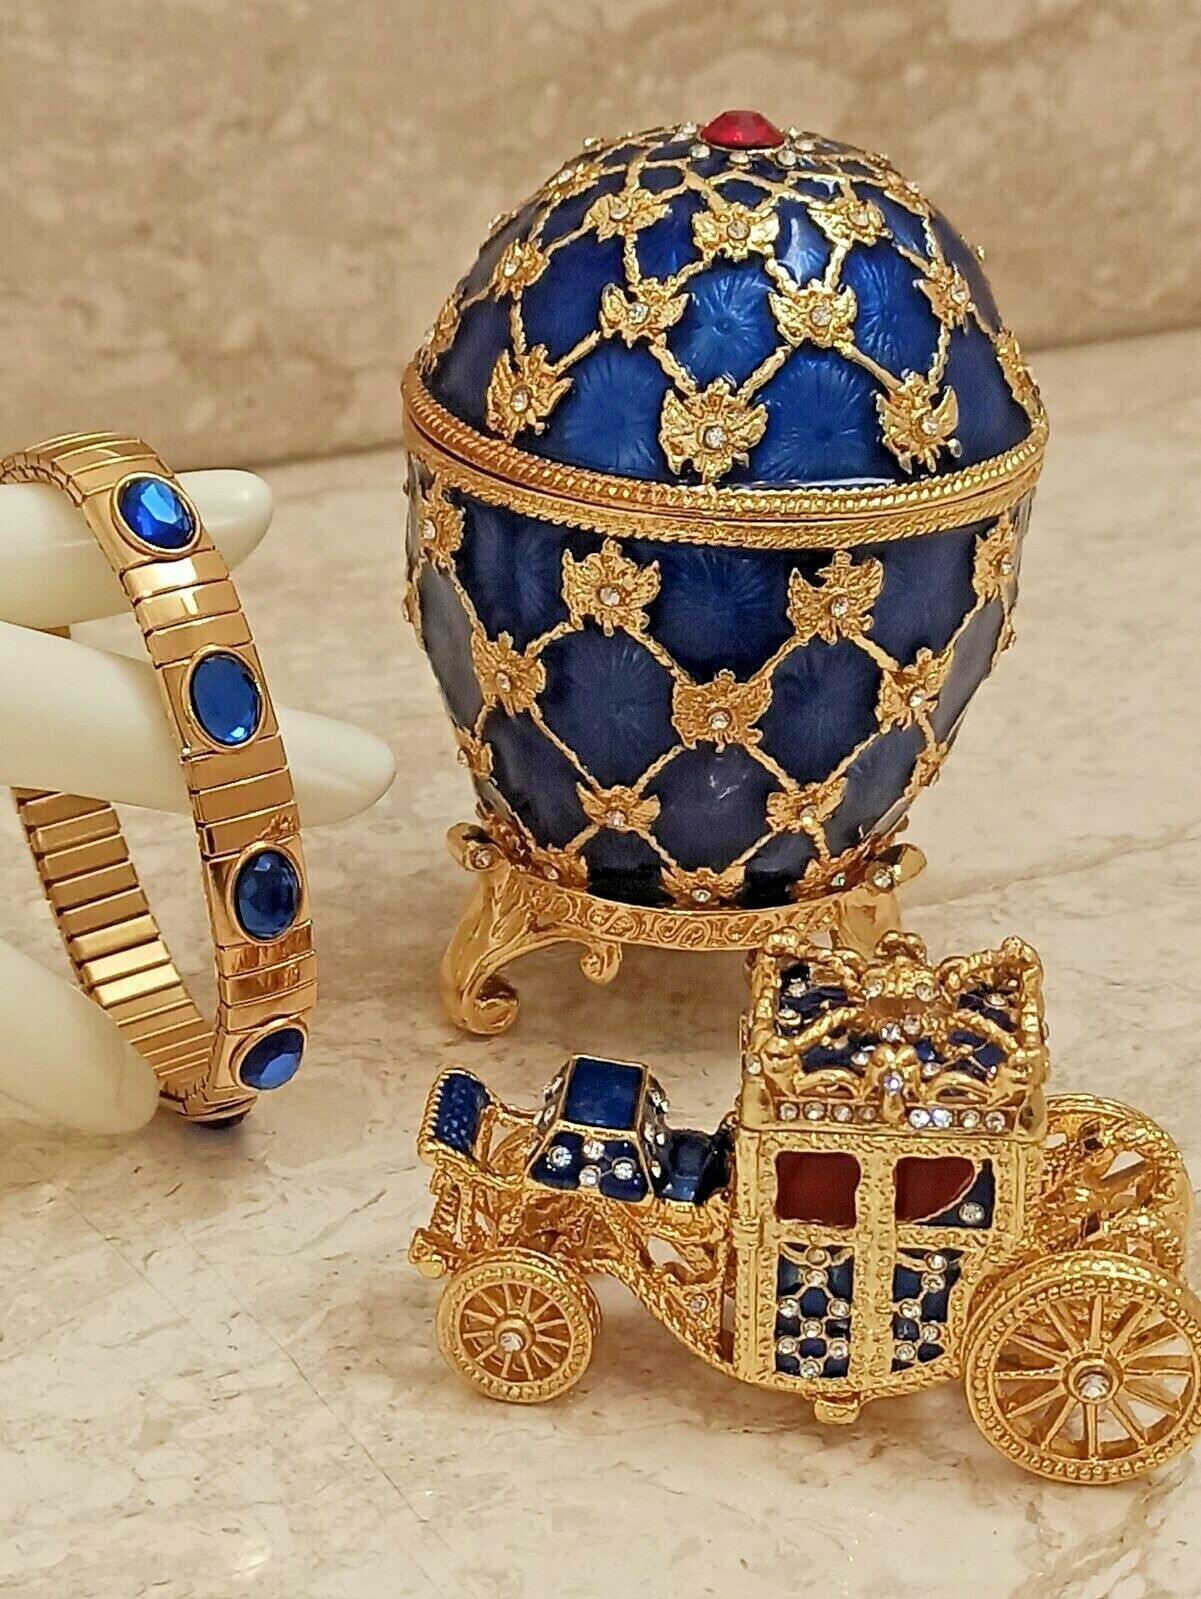 Fabrege Jewelry box set Faberge egg Queens Carriage 24K GOLD gift women Fabergé